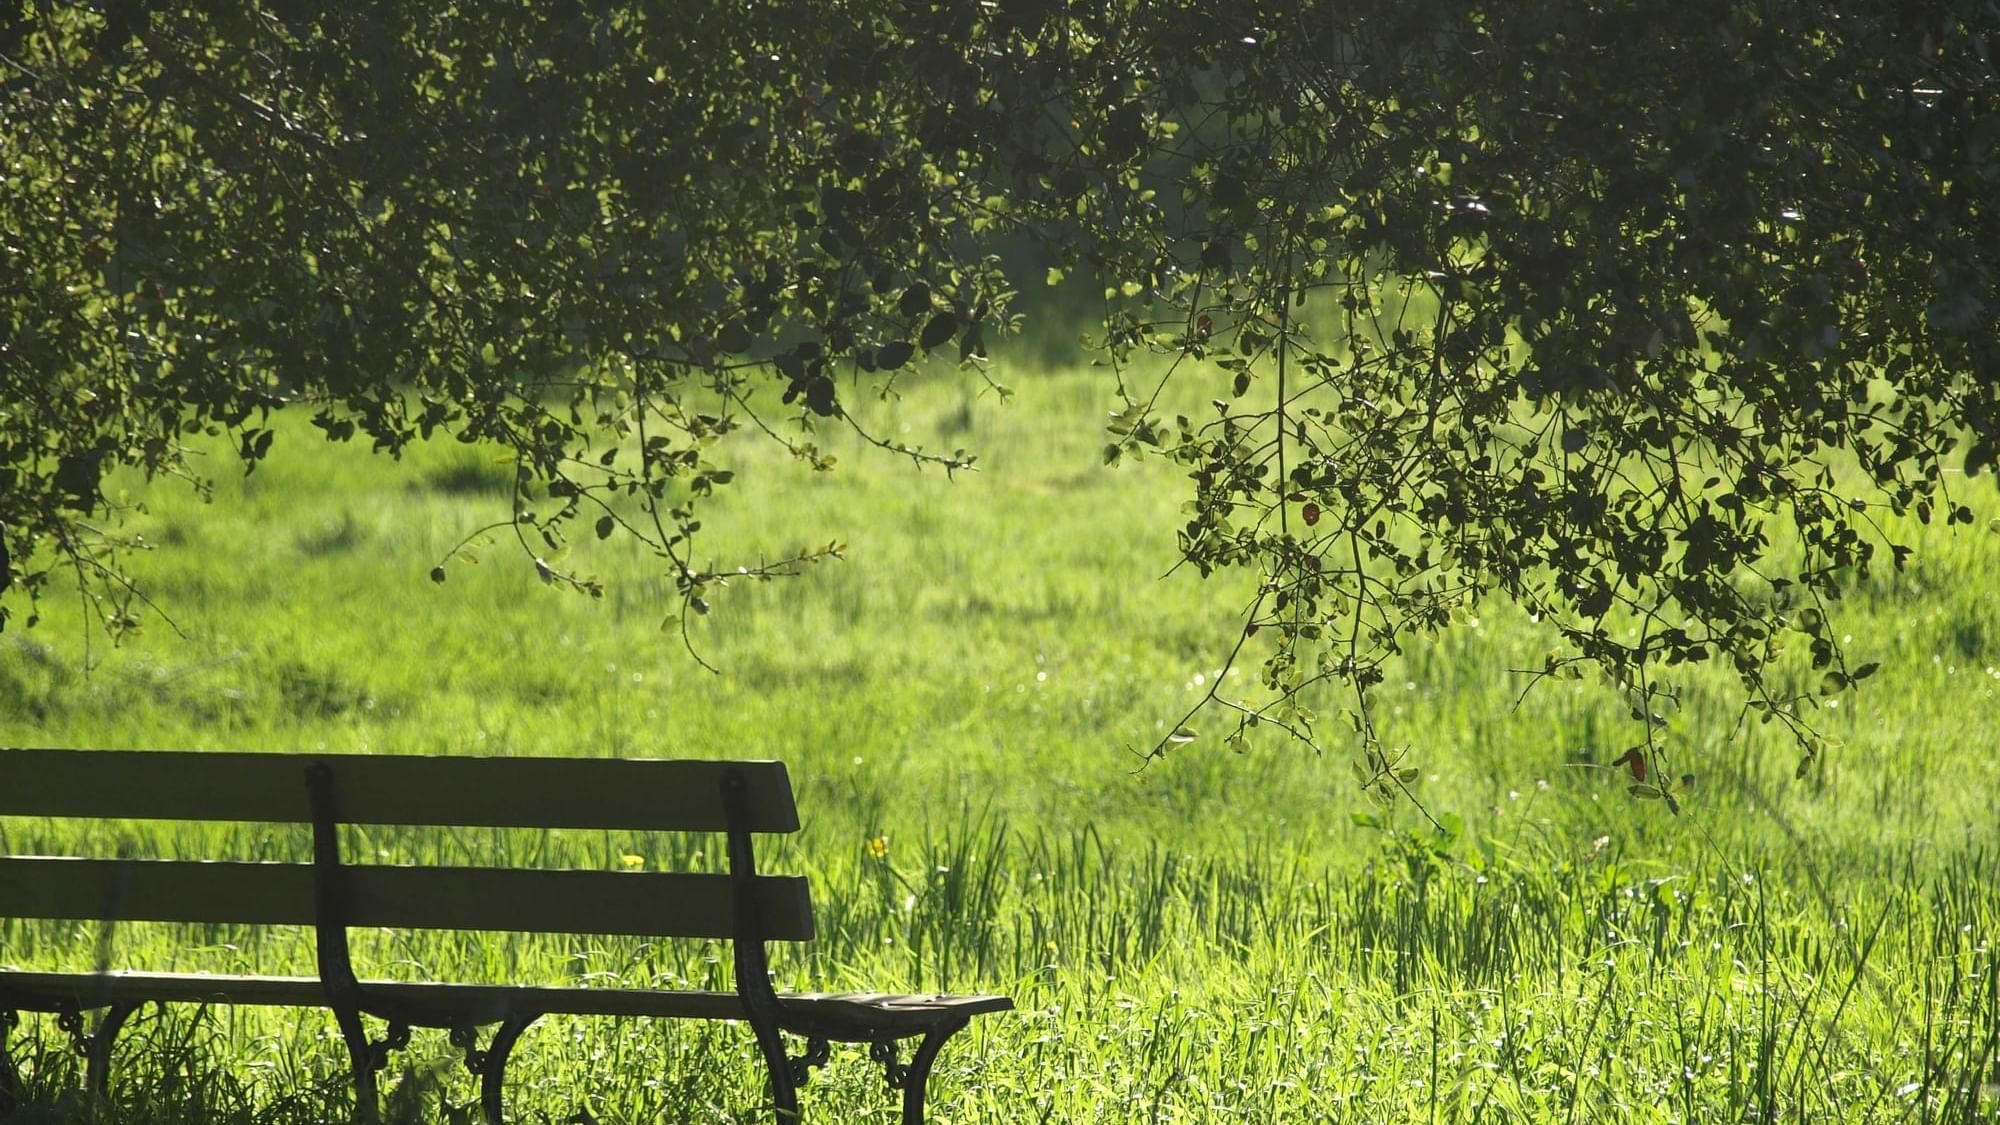 Bench on green grass in Imperial Park near The Original Hotels